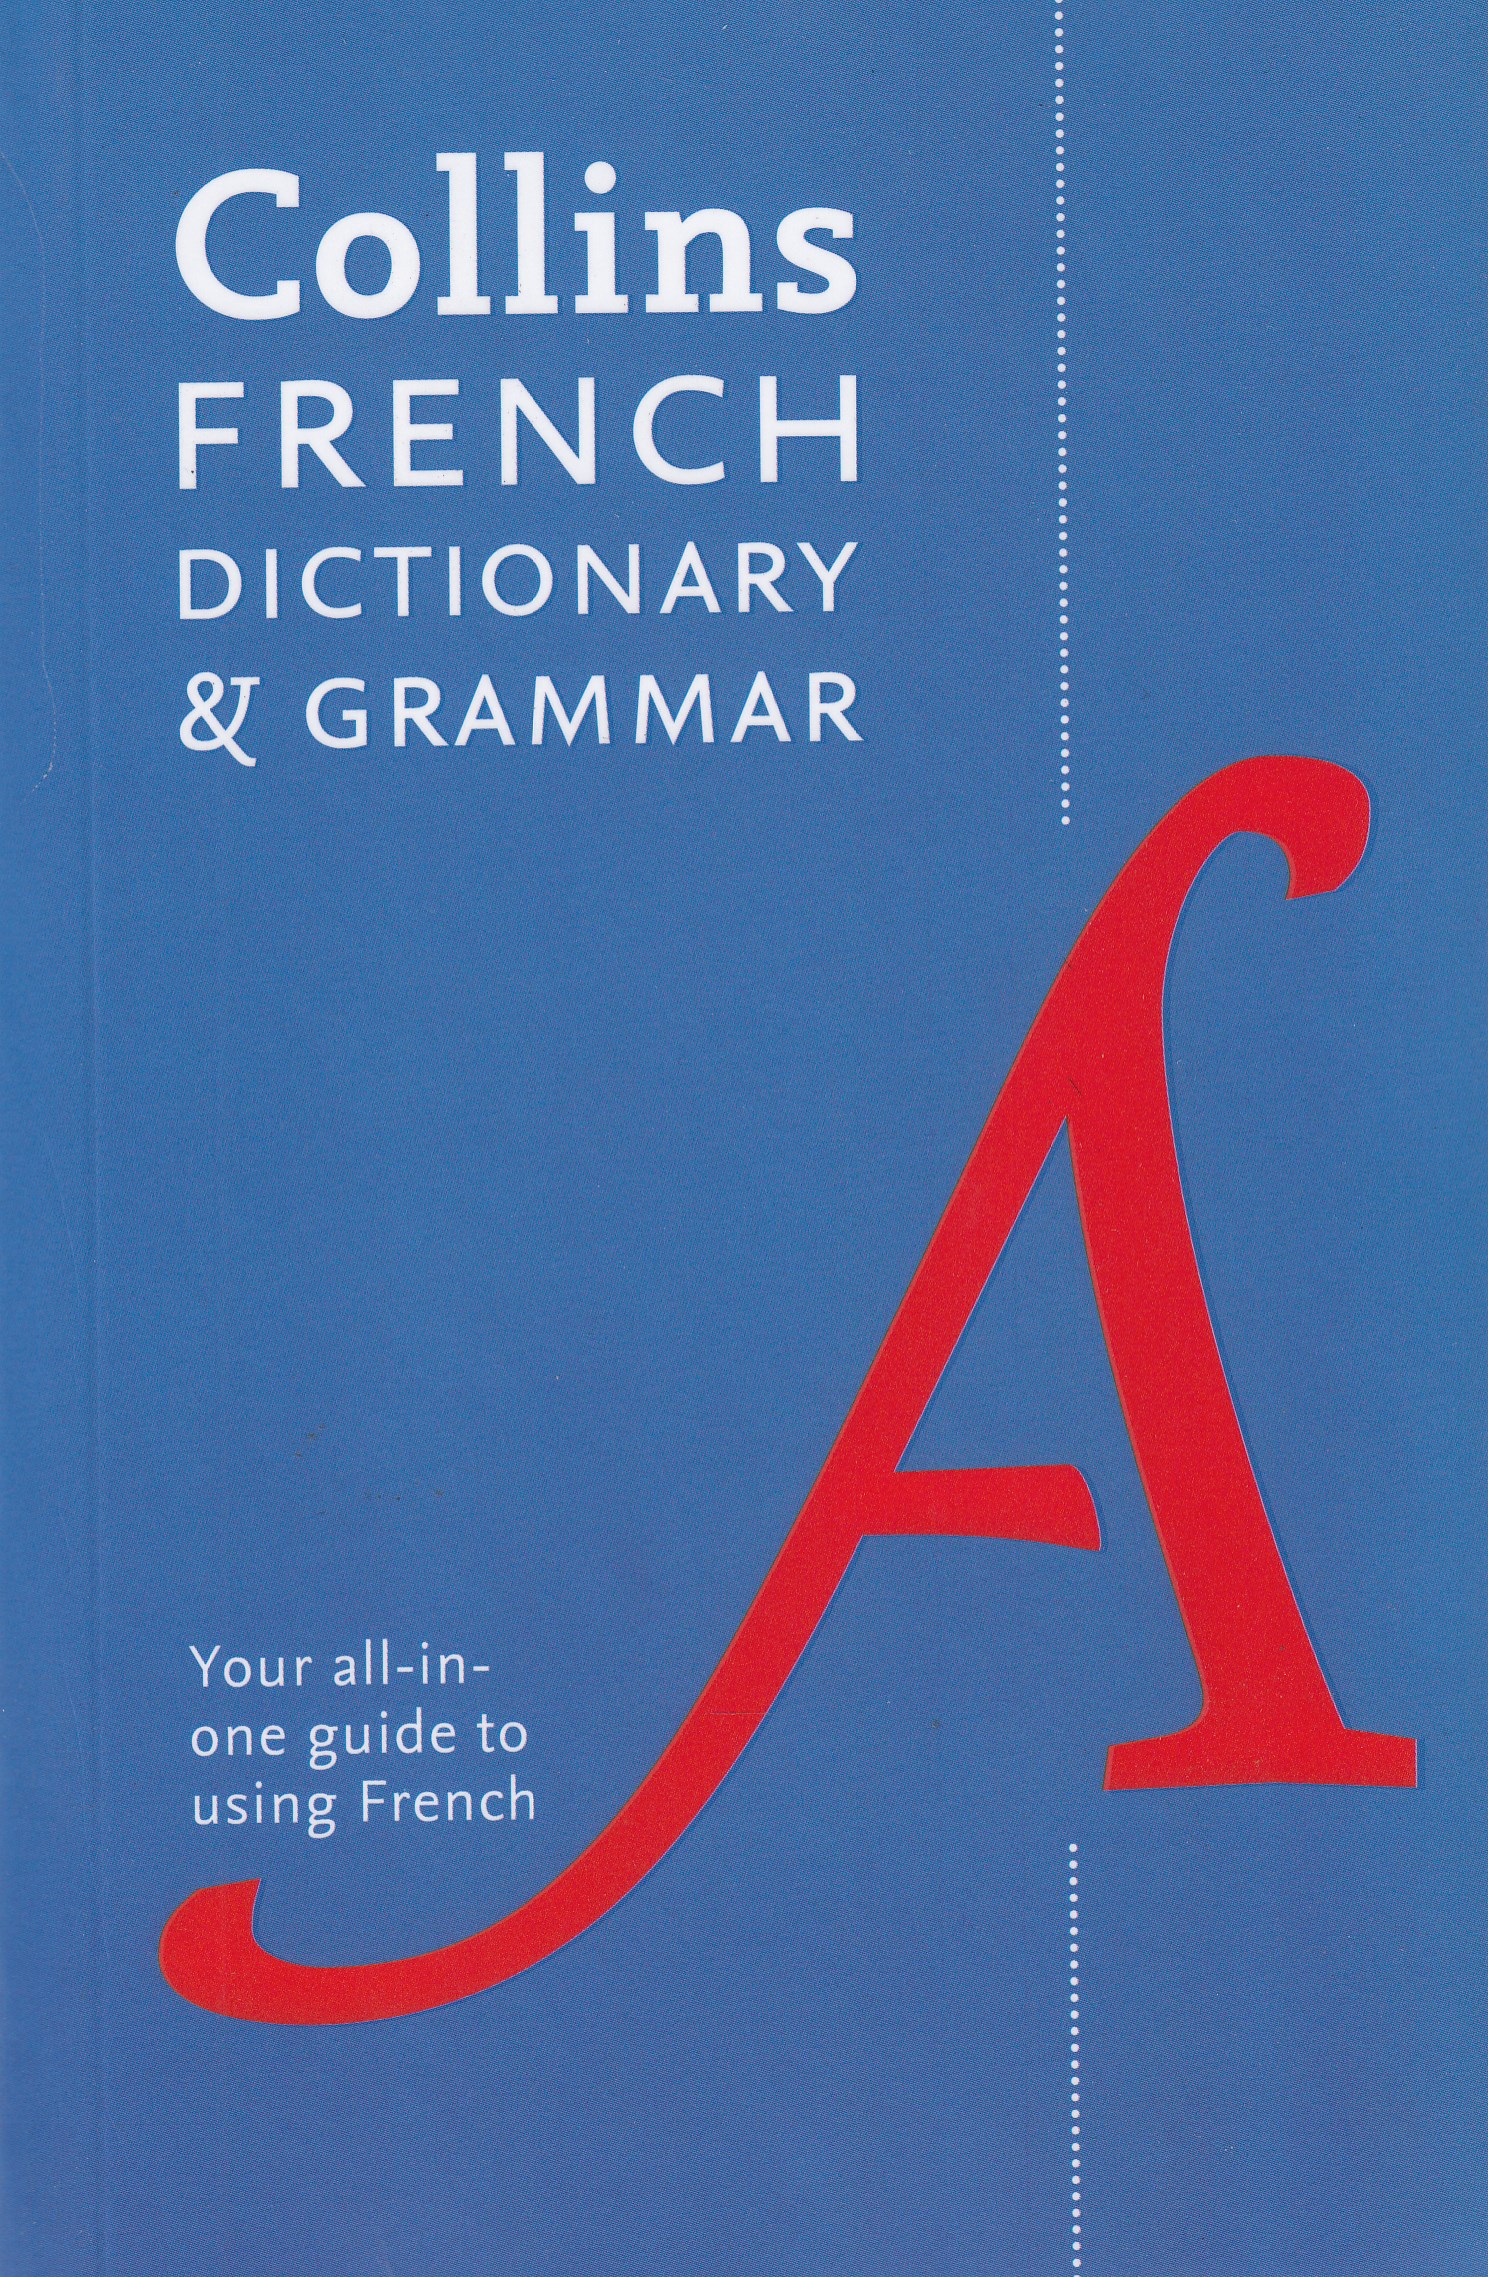 COLLINS FRENCH DICTIONARY & GRAMMAR 8ED.